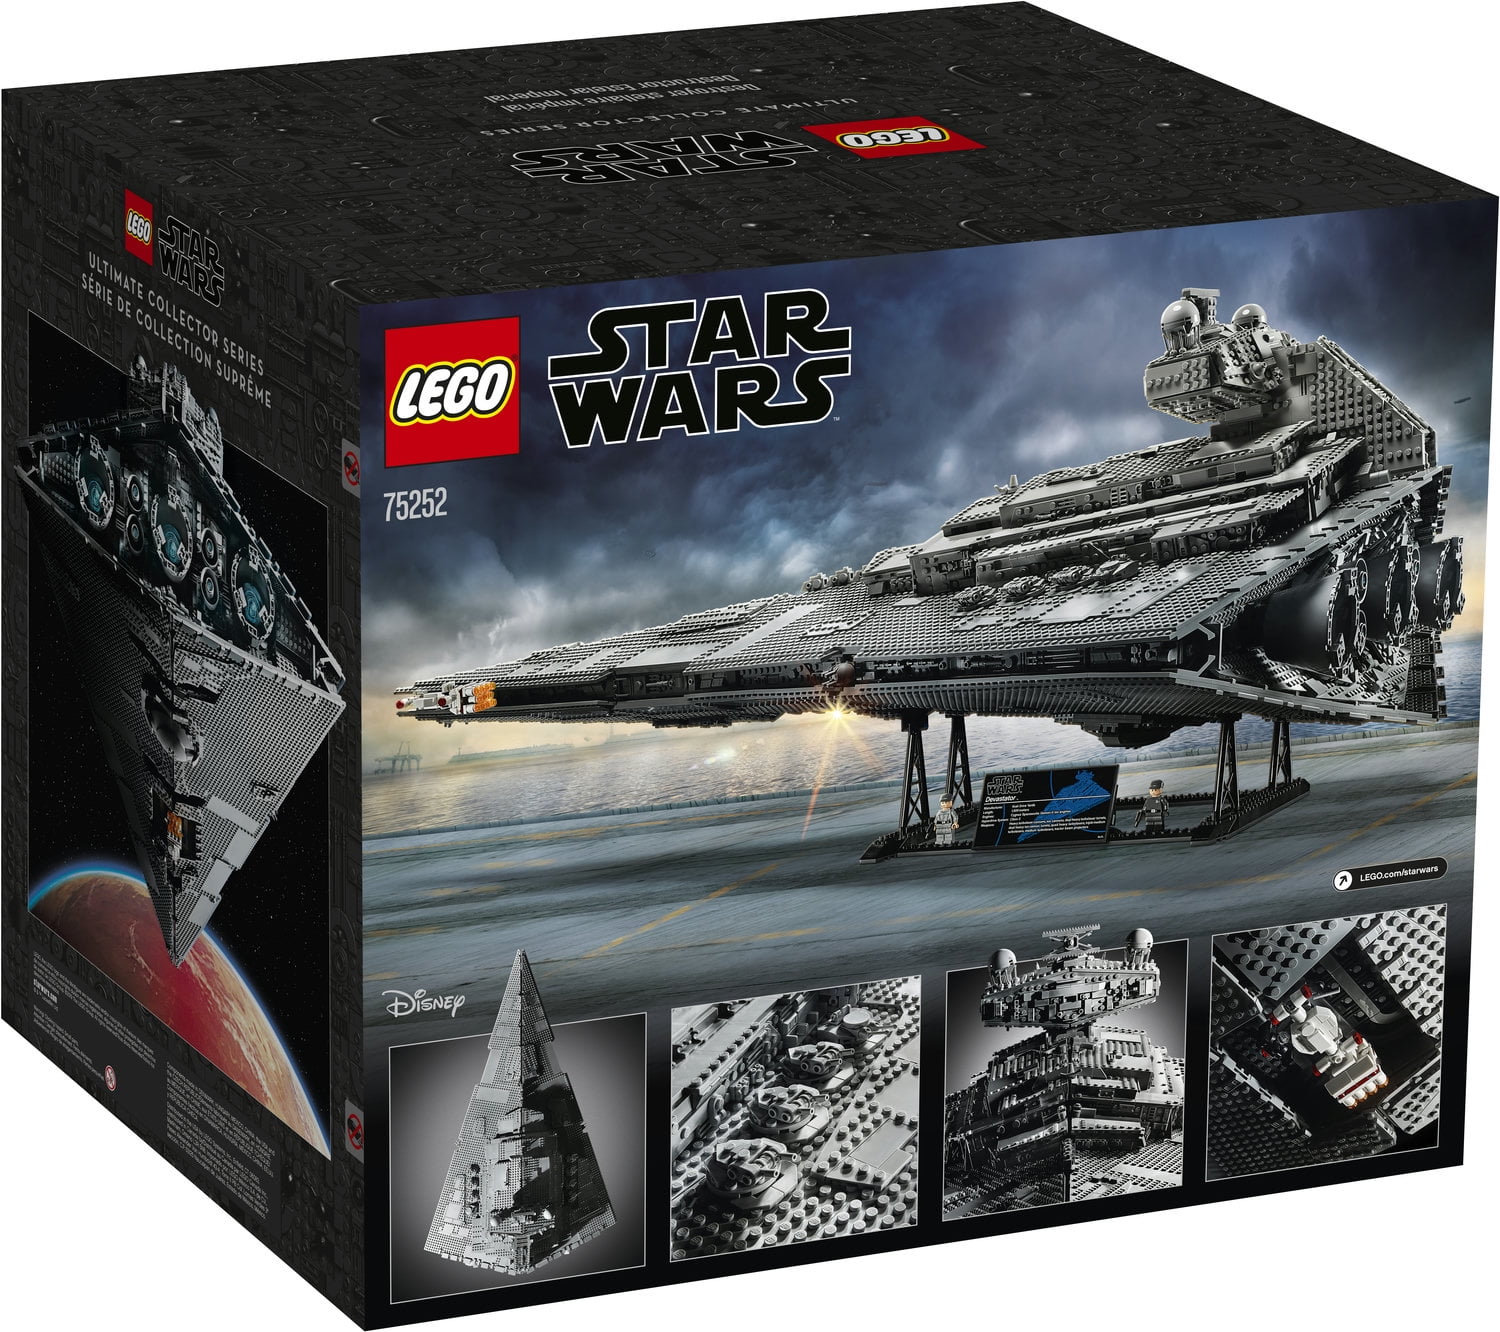 LEGO Star Wars: New Hope Star Destroyer 75252 Ultimate Collector Series Building Kit (4,784 Pieces) - Walmart.com